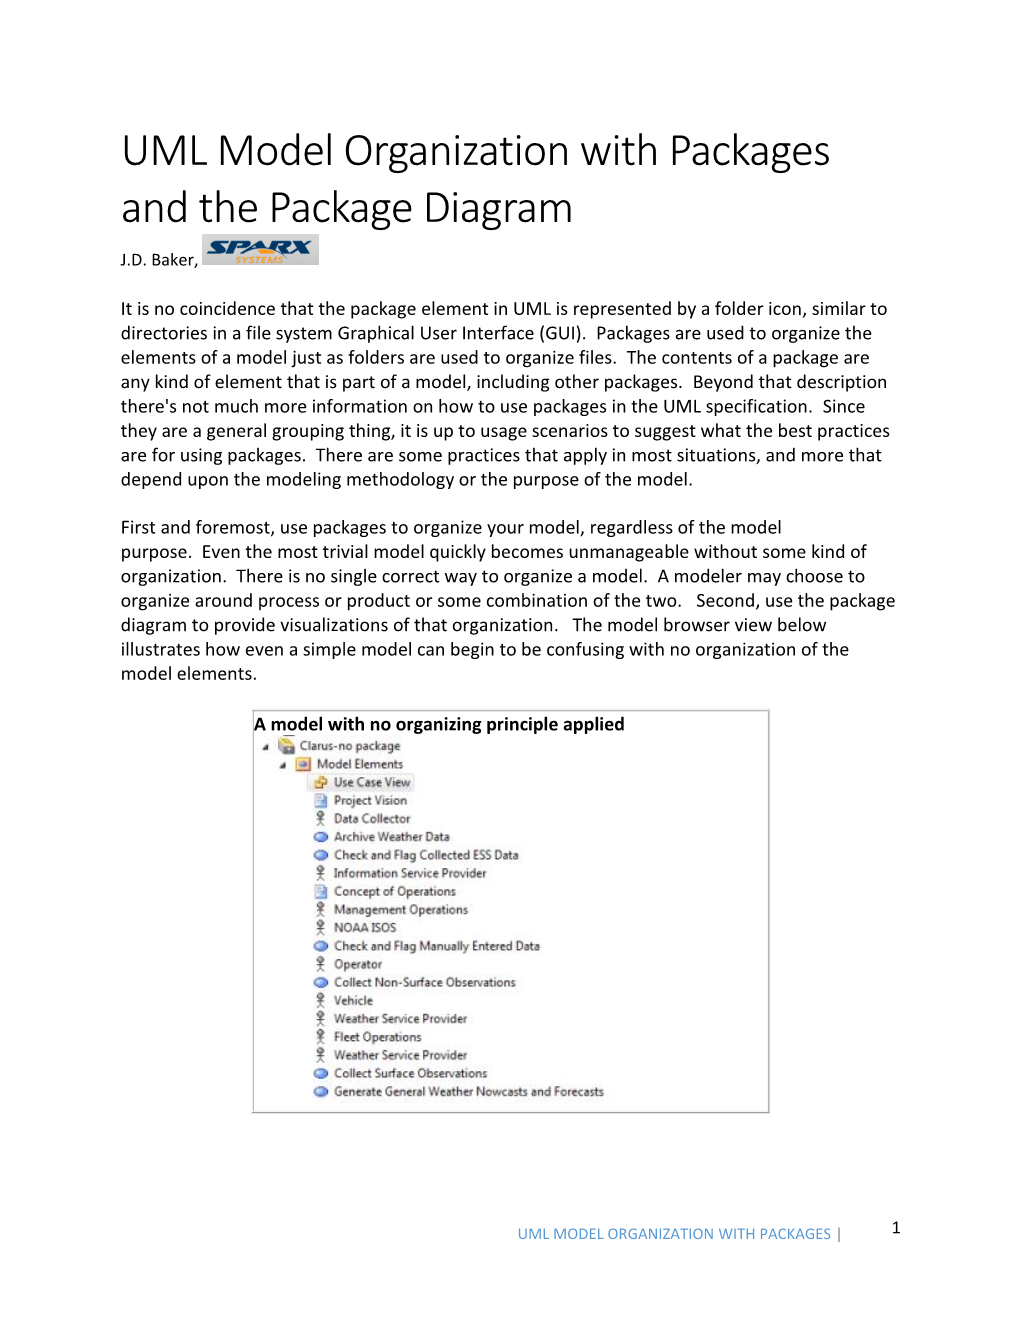 UML Model Organization with Packages and the Package Diagram J.D